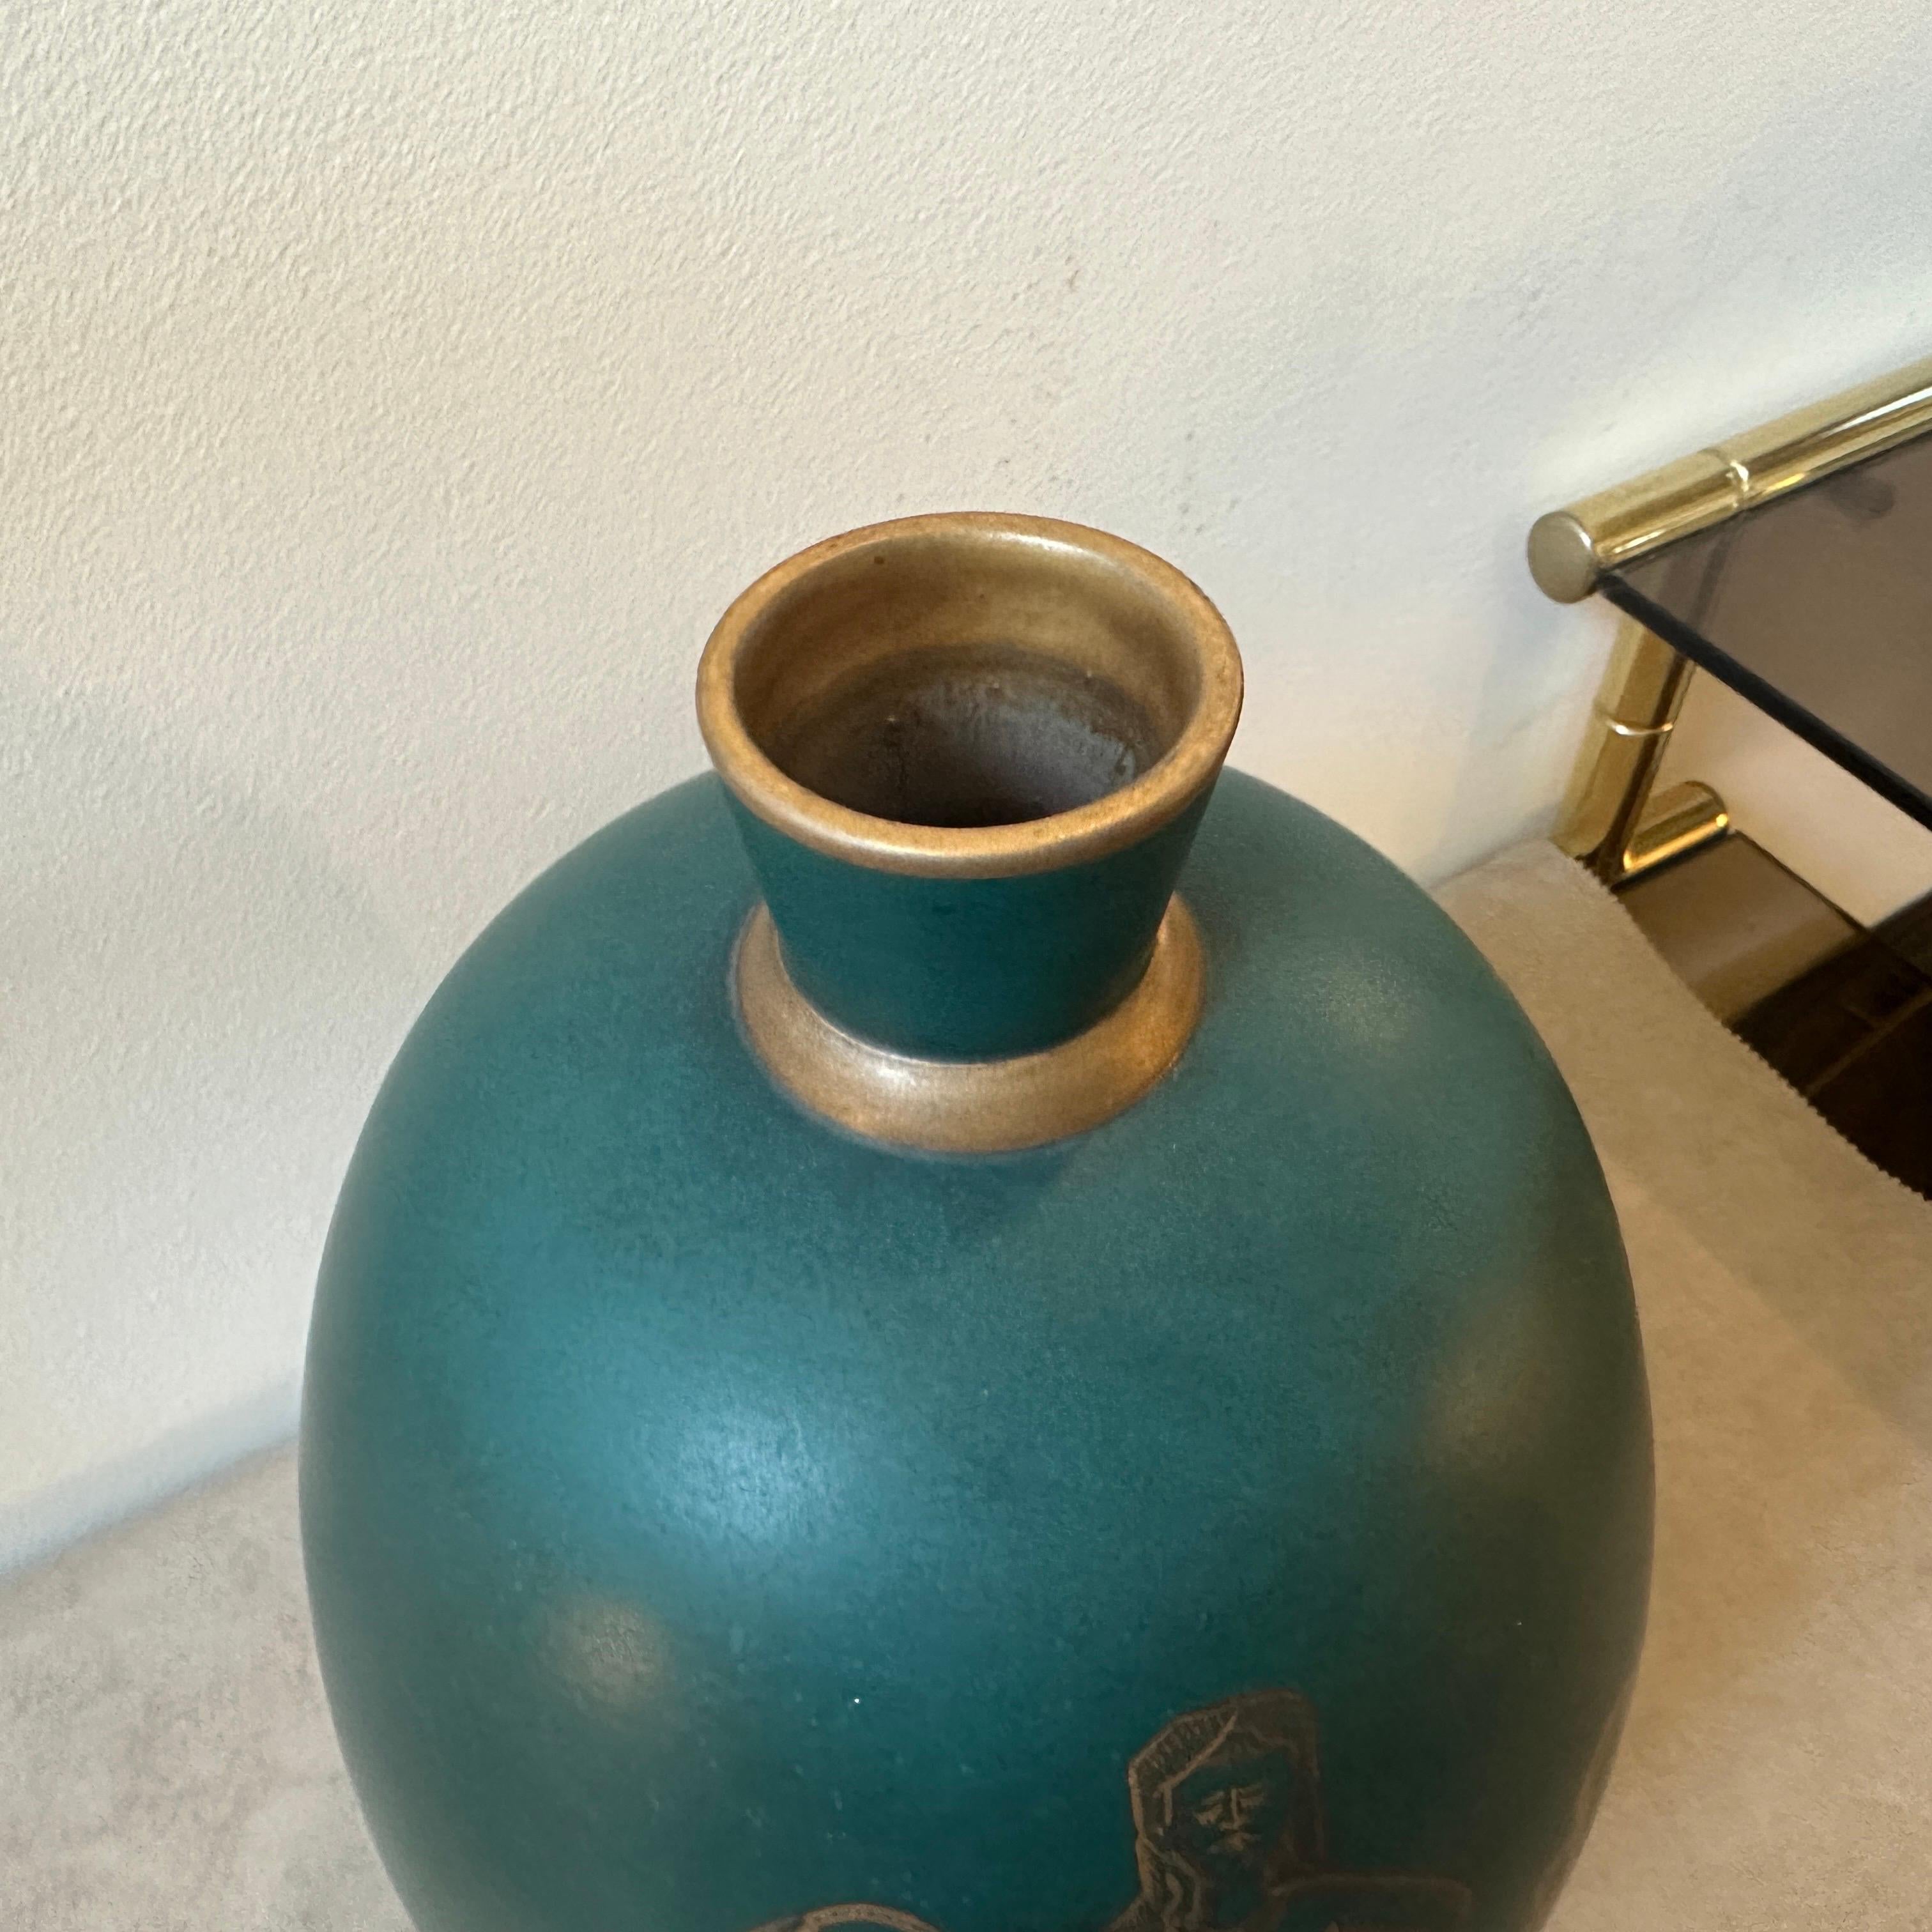 A 1939 Dated Art Deco Gio Ponti Inspired Green and Gold Ceramic Sicilian Vase For Sale 6